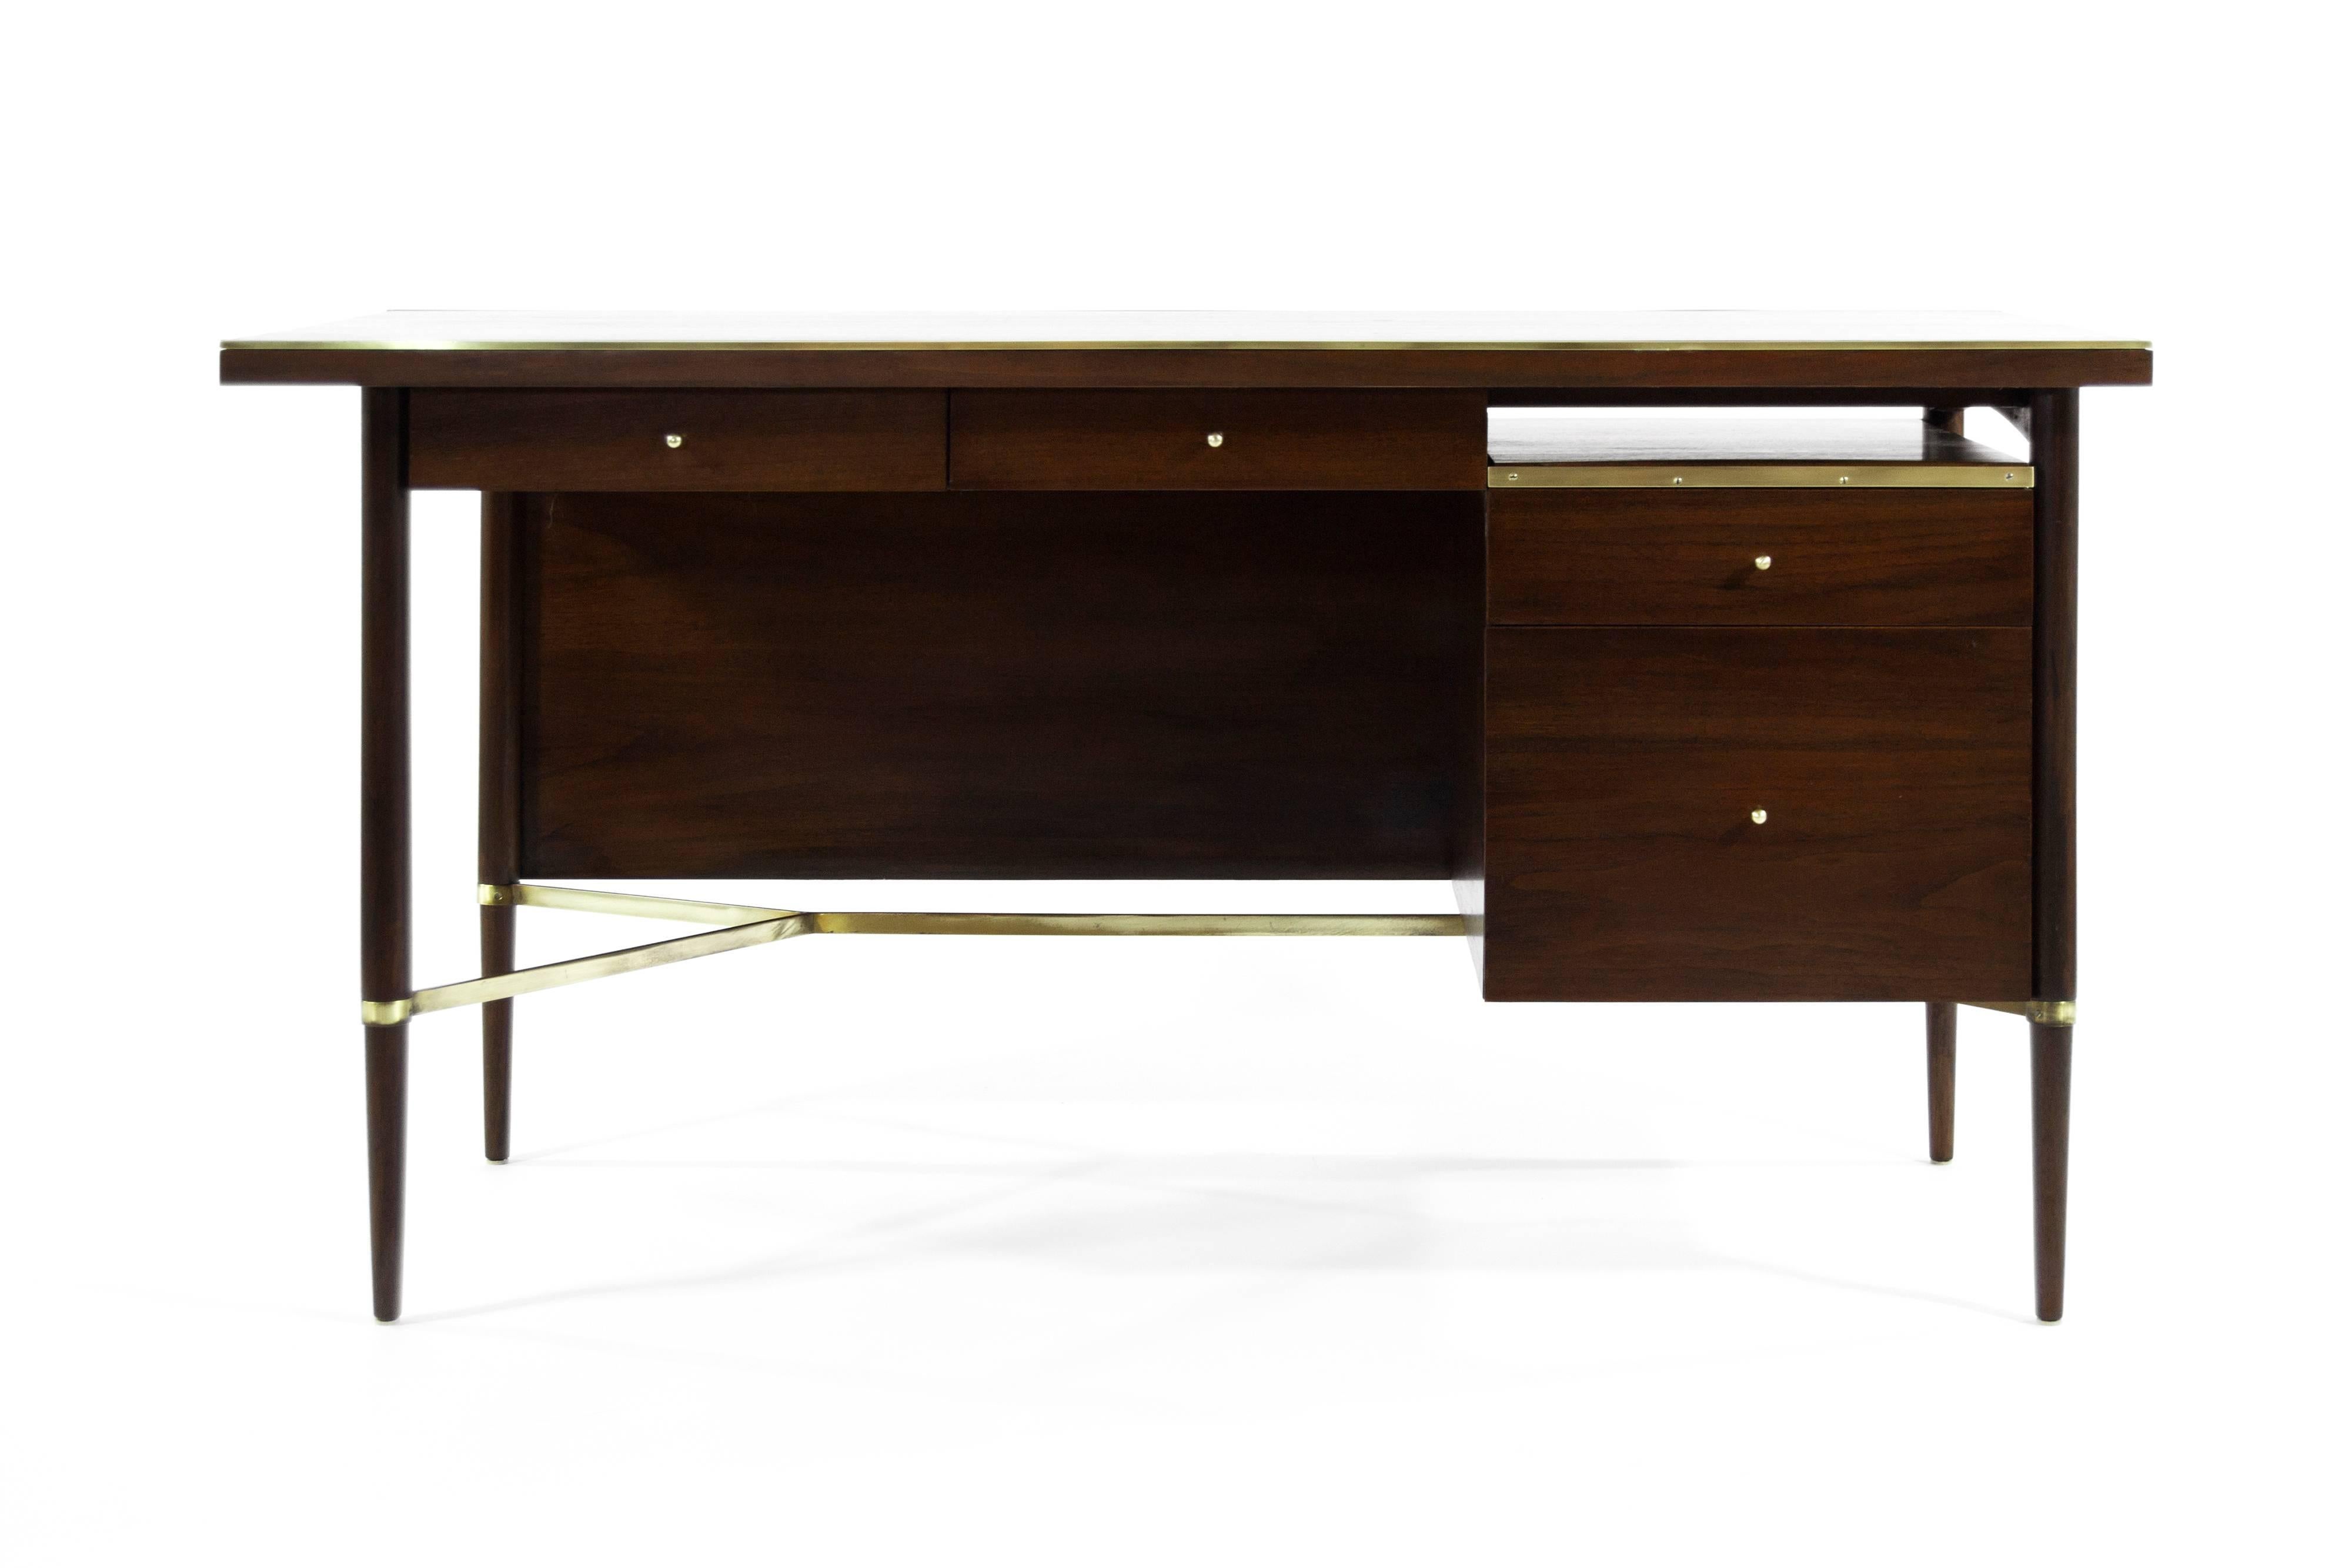 Stunning desk by Paul McCobb, Connoisseur Collection, fully restored.